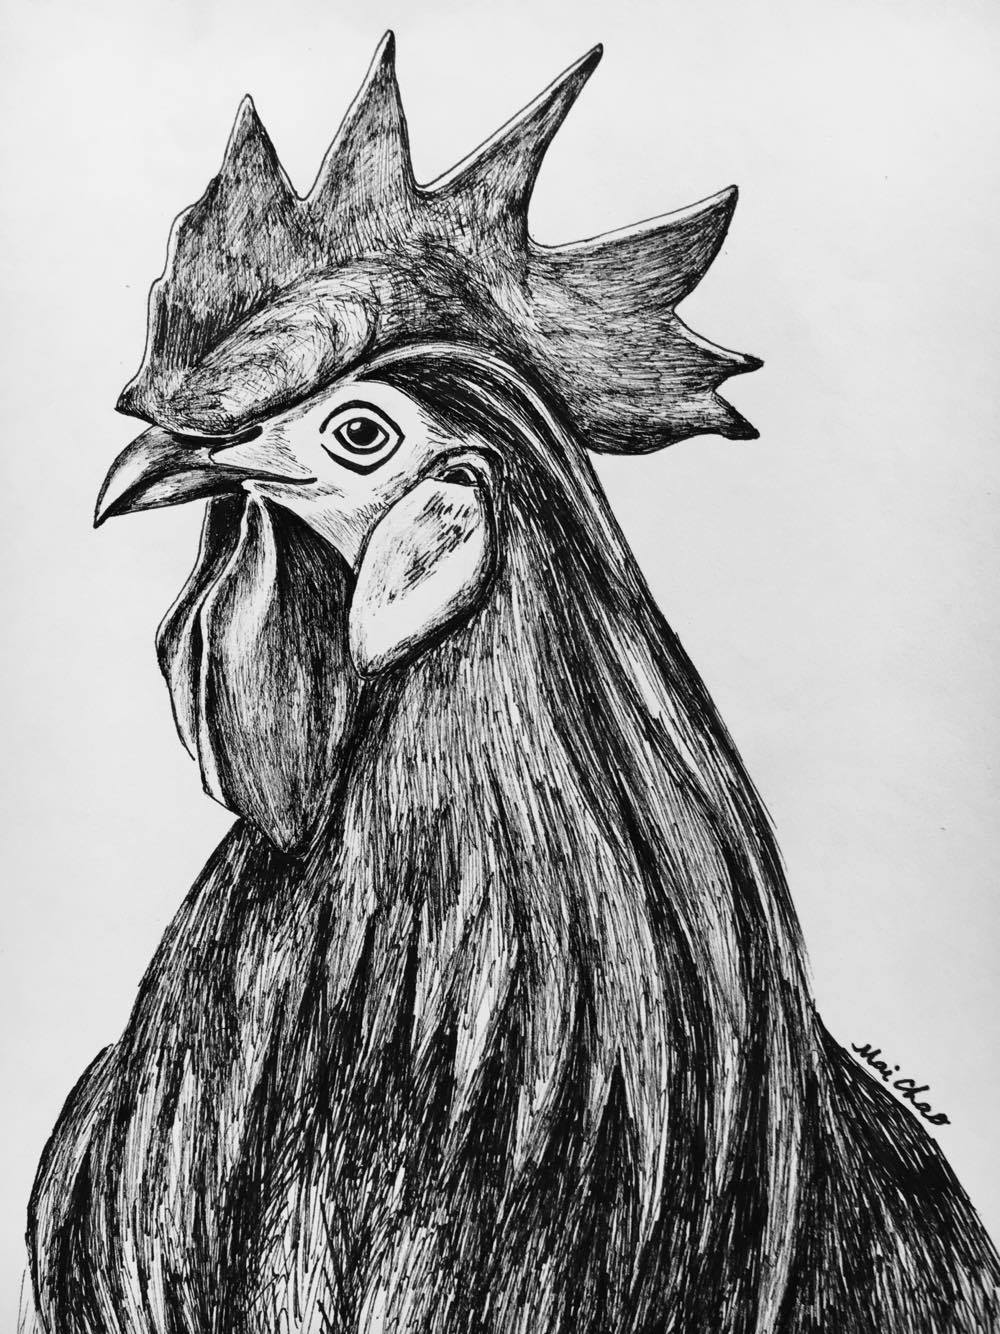 The Brave Rooster, Lao Kai